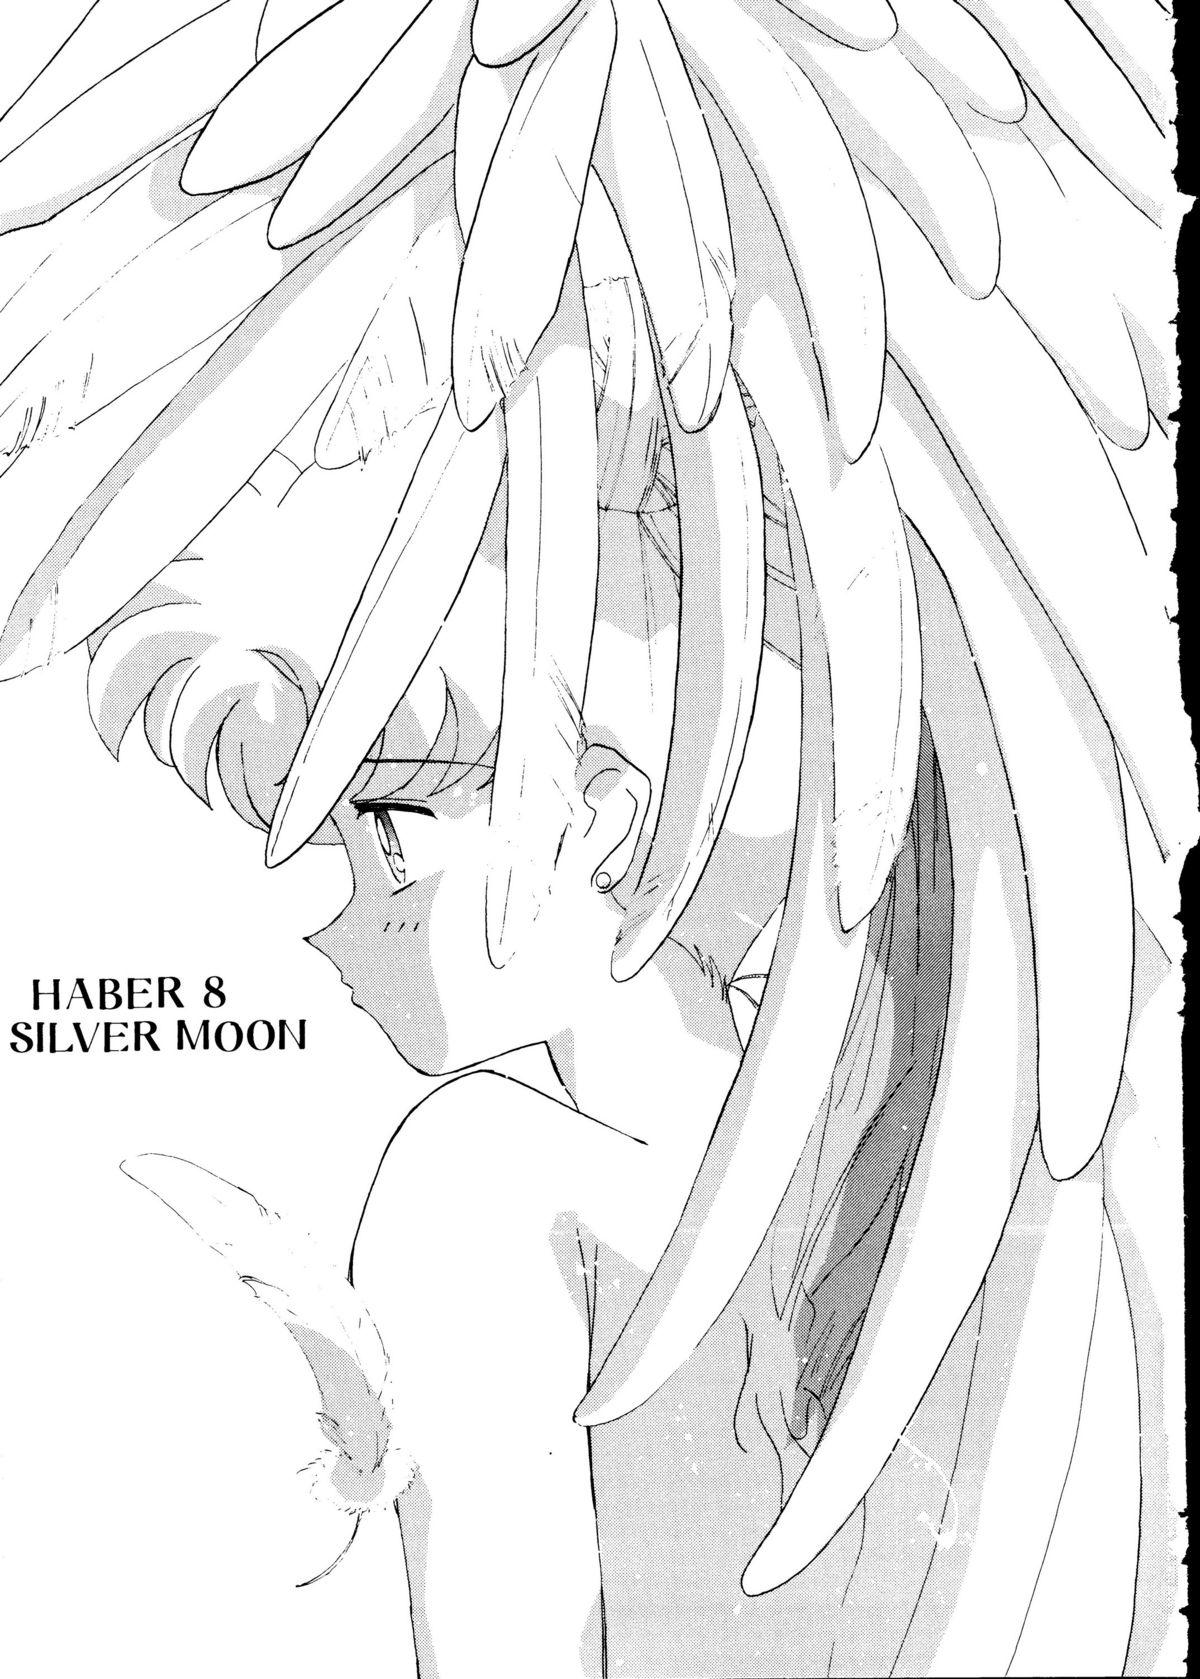 Girls HABER 8 SILVER MOON - Sailor moon Large - Page 2